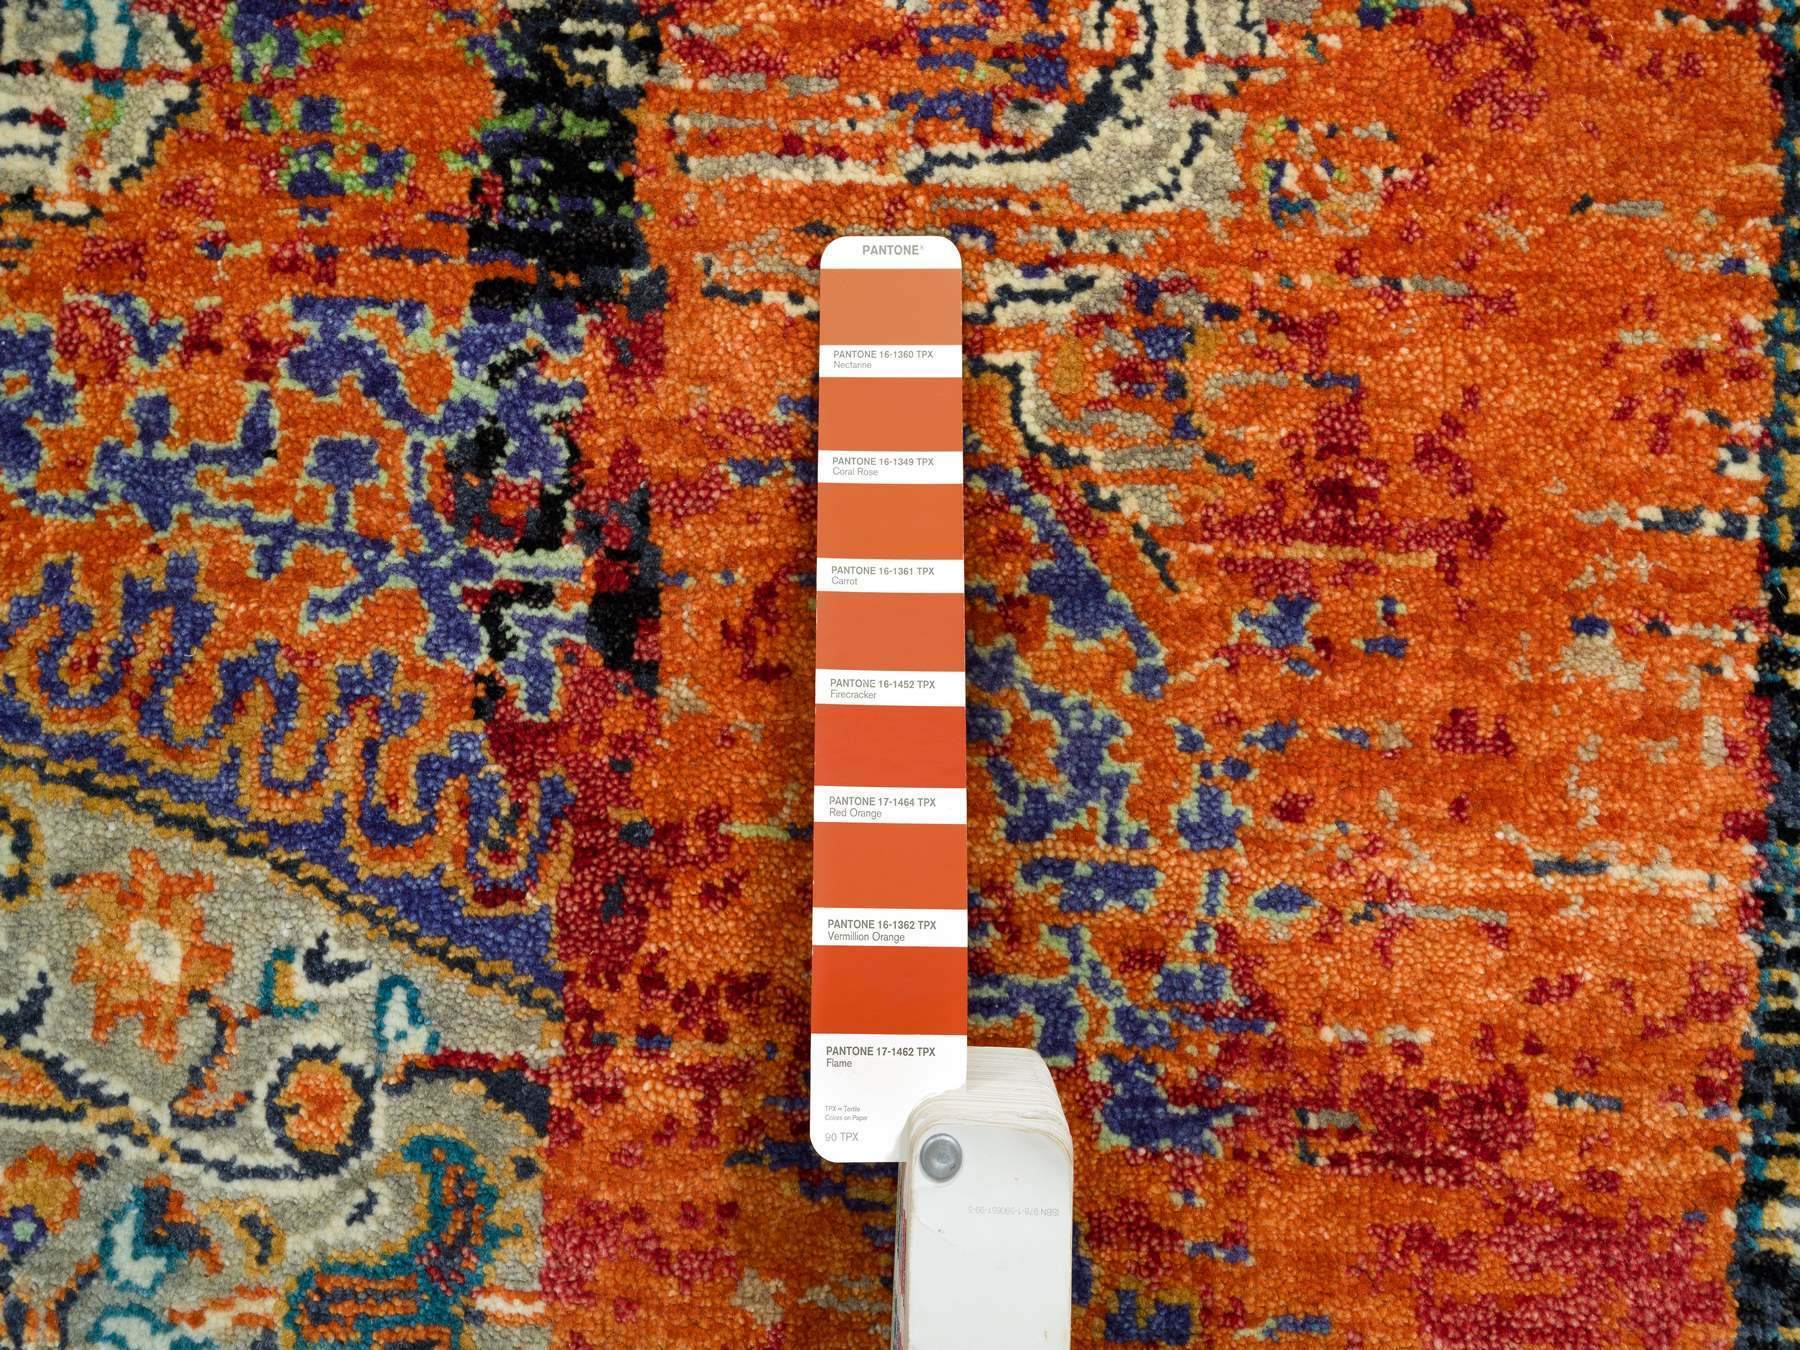 TransitionalRugs ORC586305